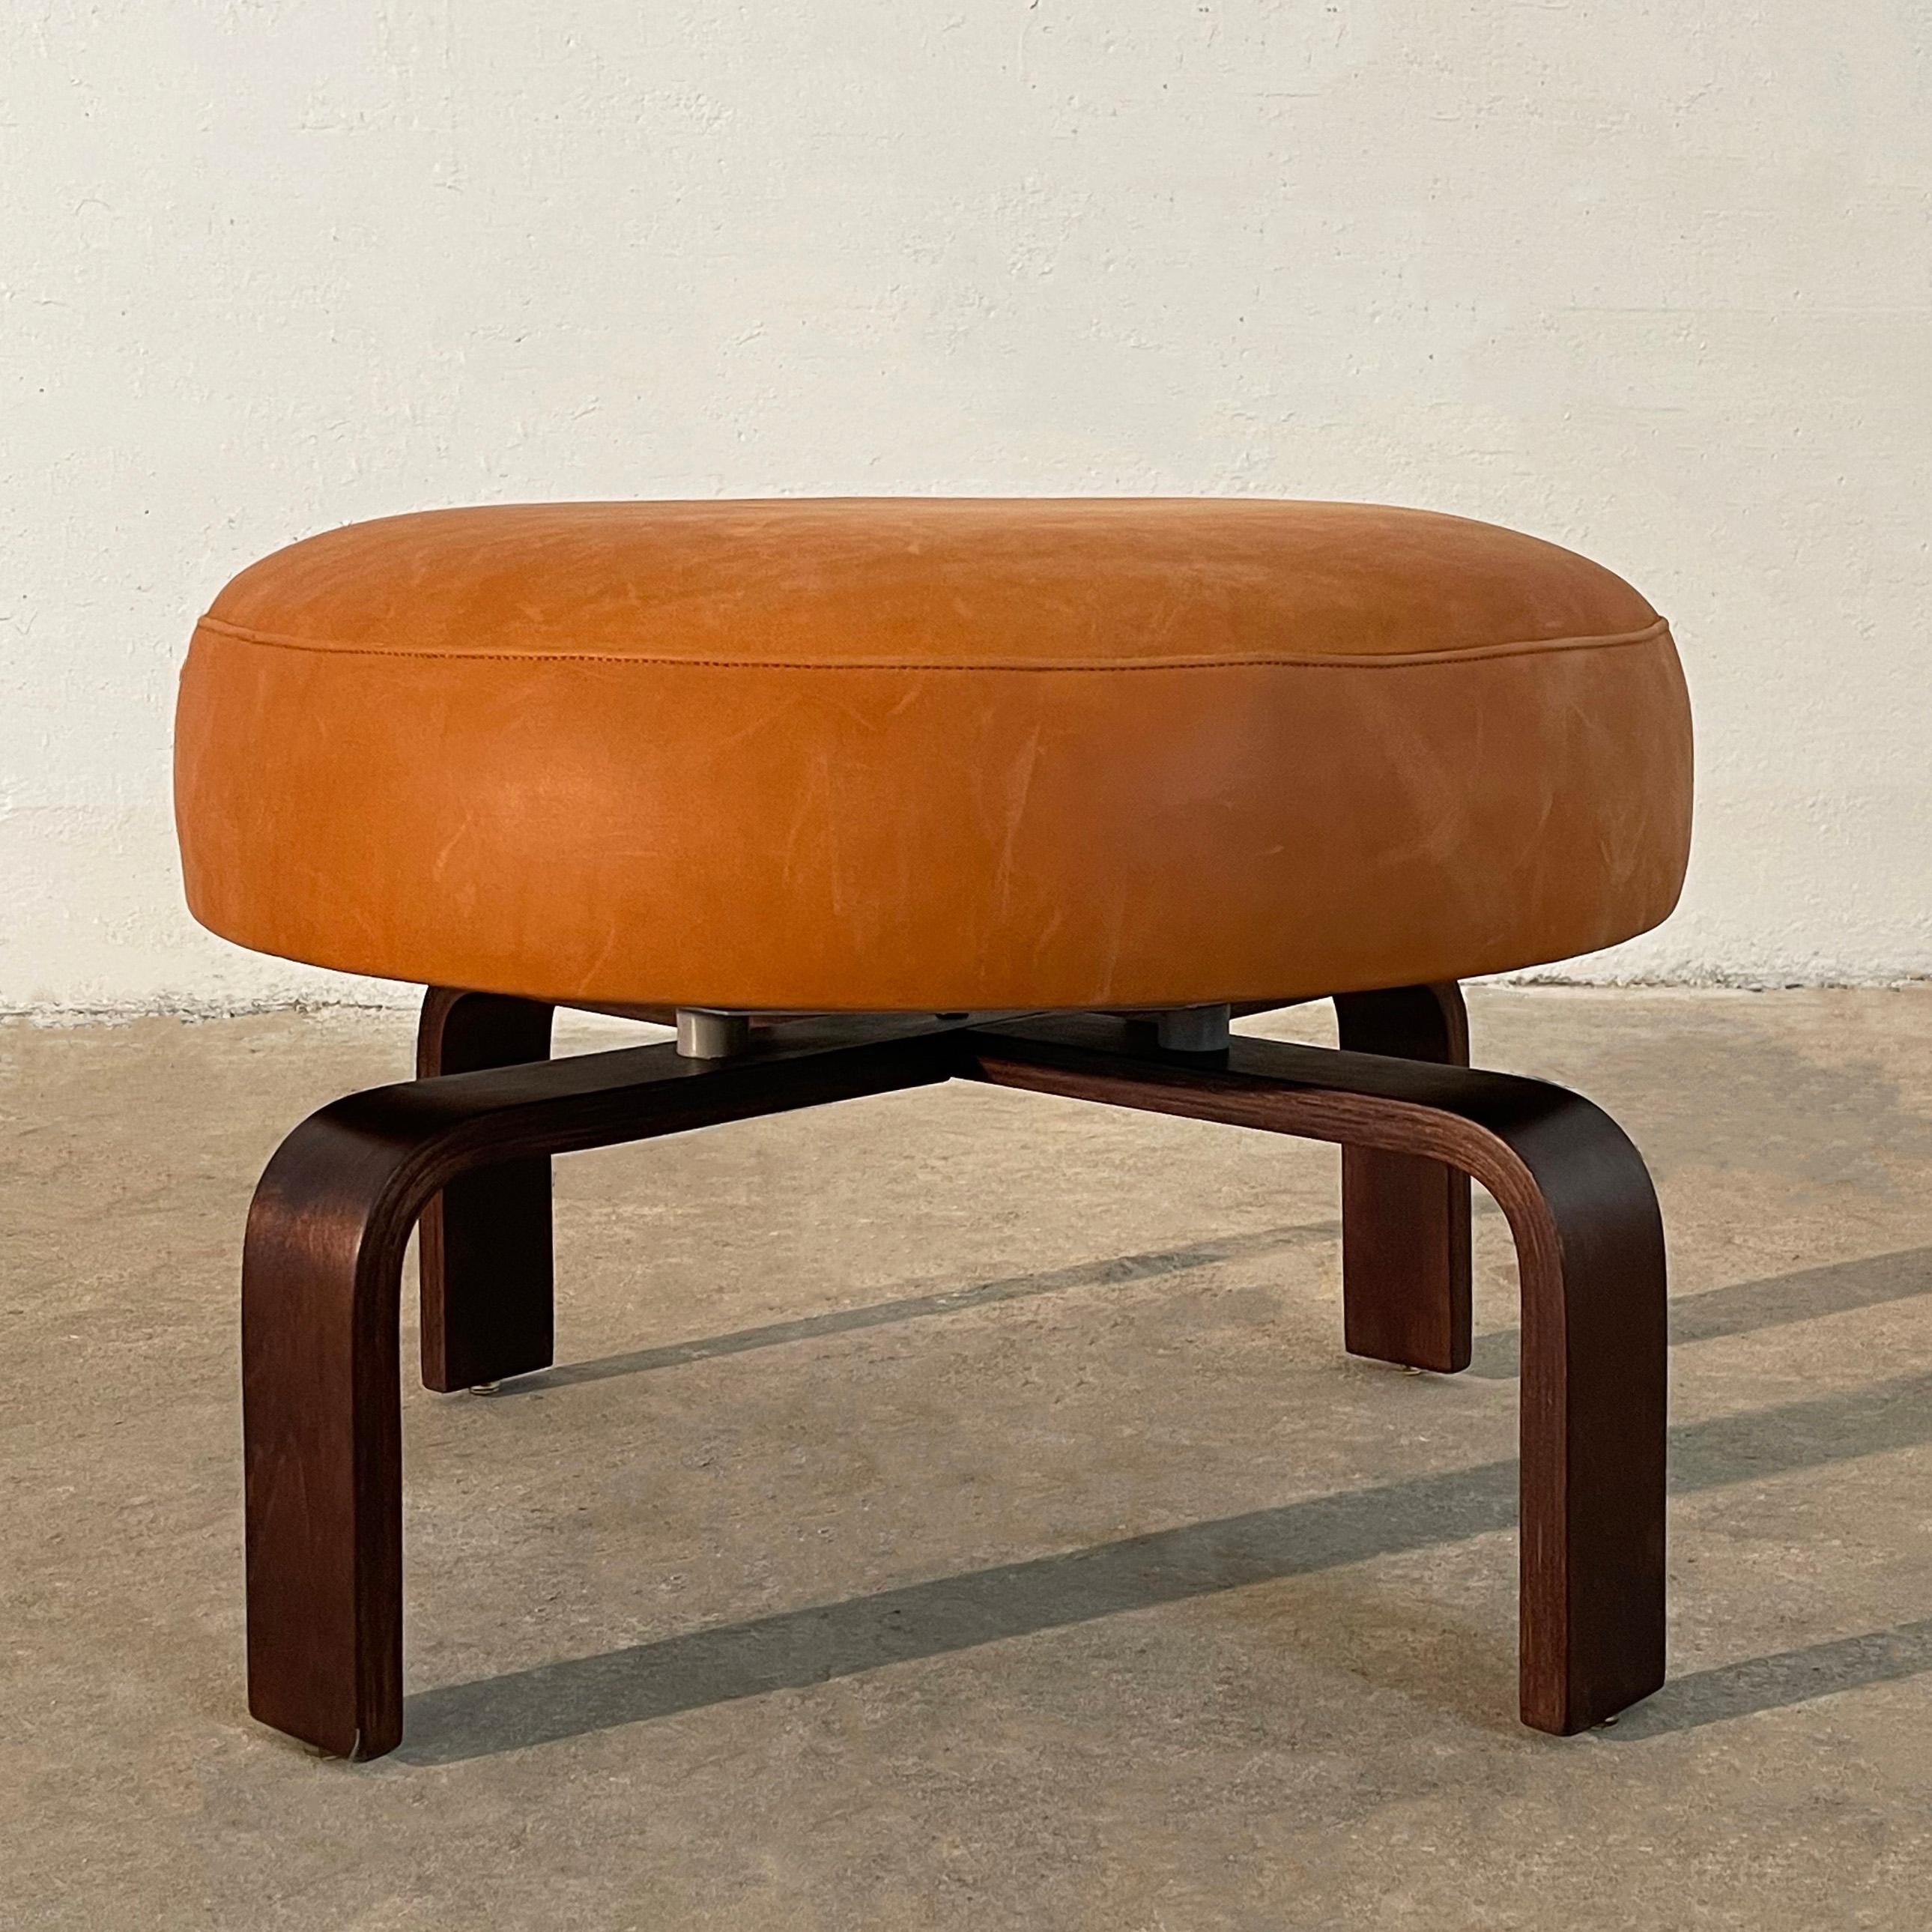 Modern, custom ottoman circa 1980's features a newly upholstered pouf in supple, rust orange leather that swivels on stained bent maple legs. Seat diameter is 24 inches and the footprint is 28 inches.

